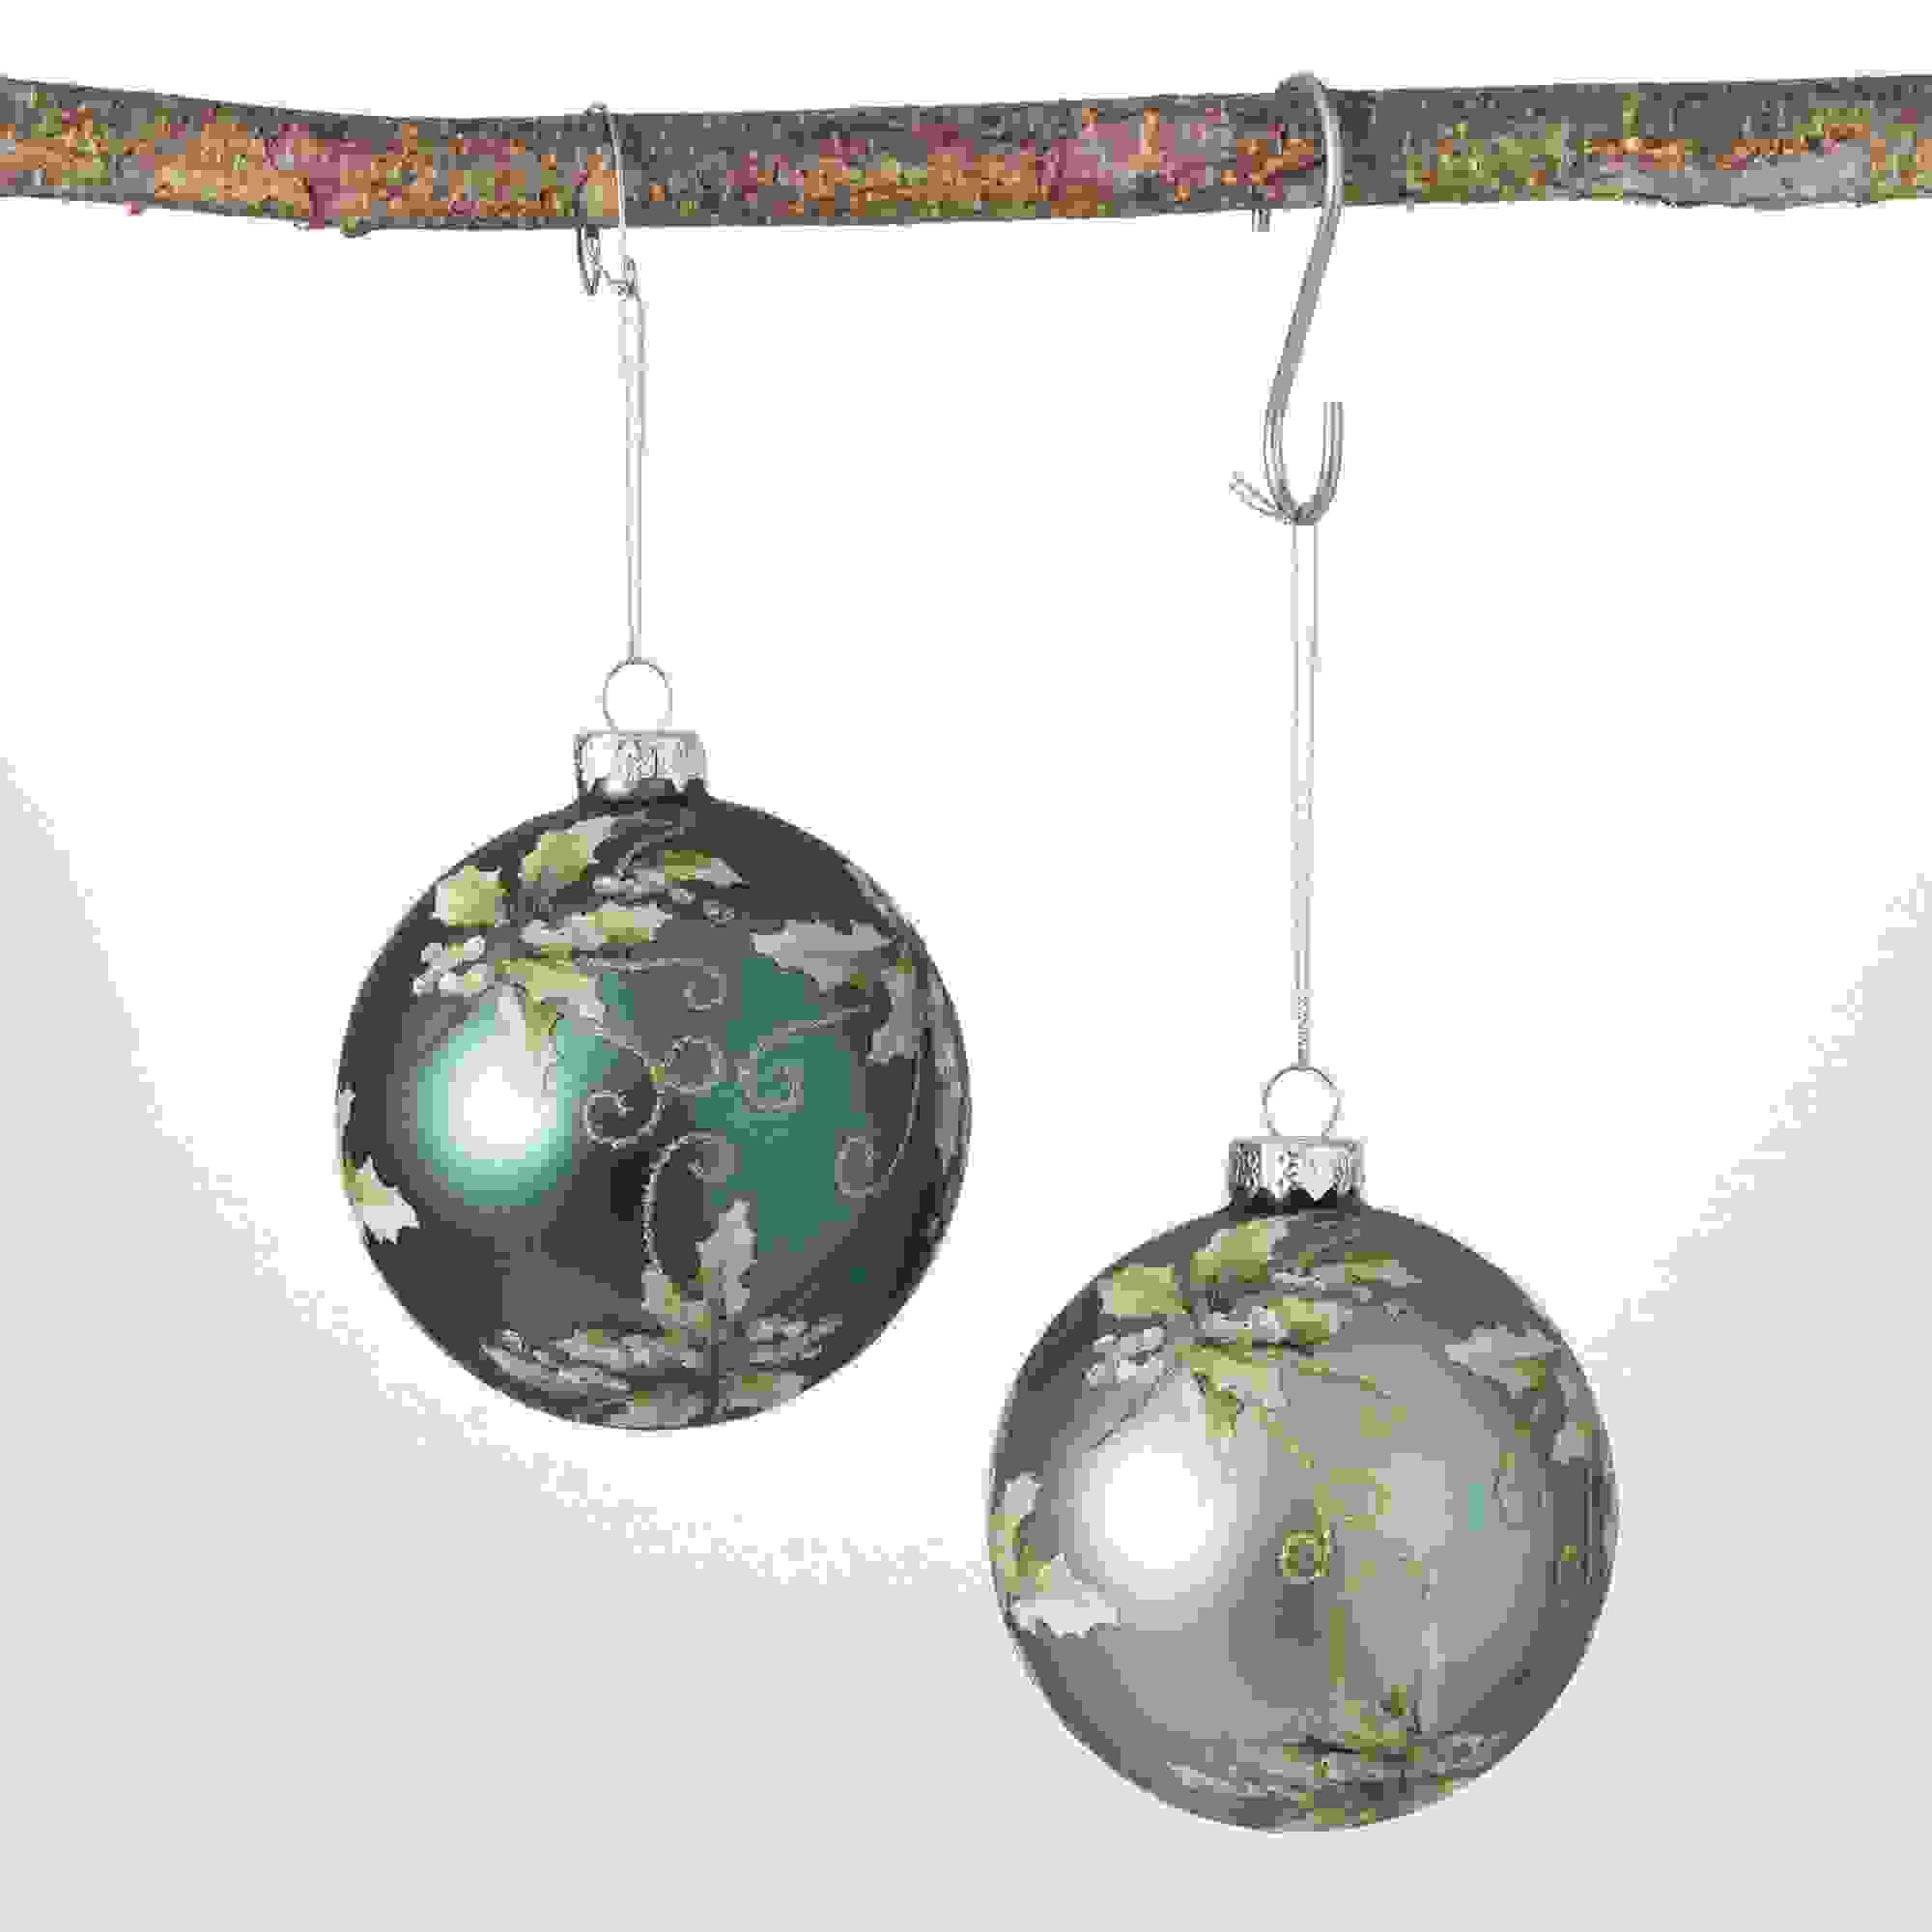 HOLLY BALL ORNAMENT SET OF 2